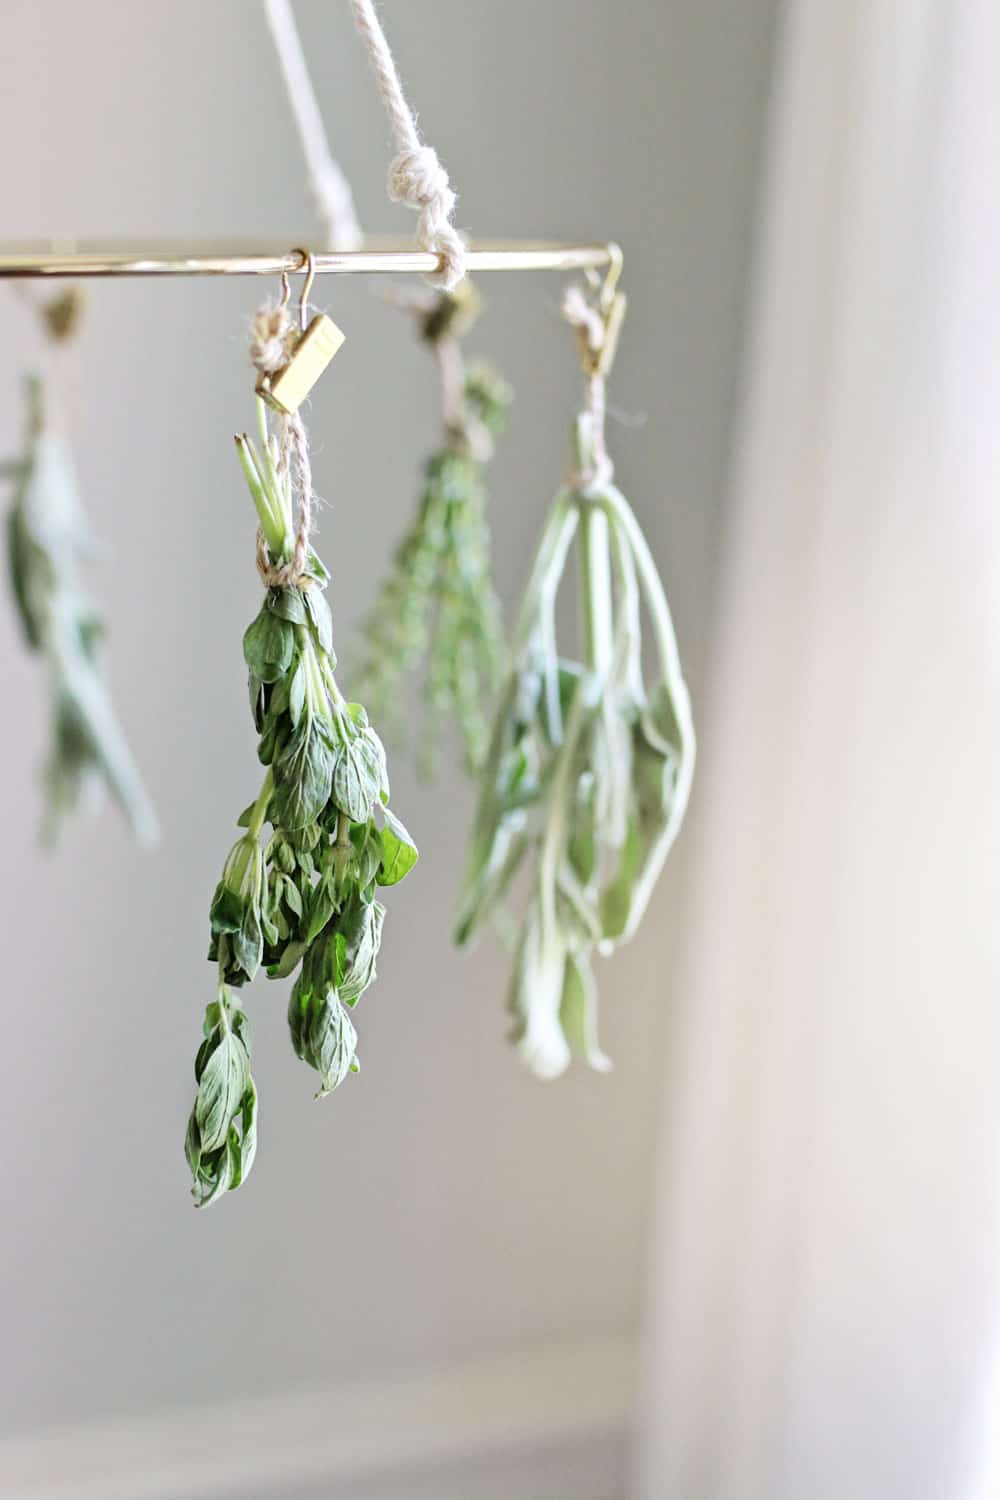 Dry your own herbs with a DIY drying rack